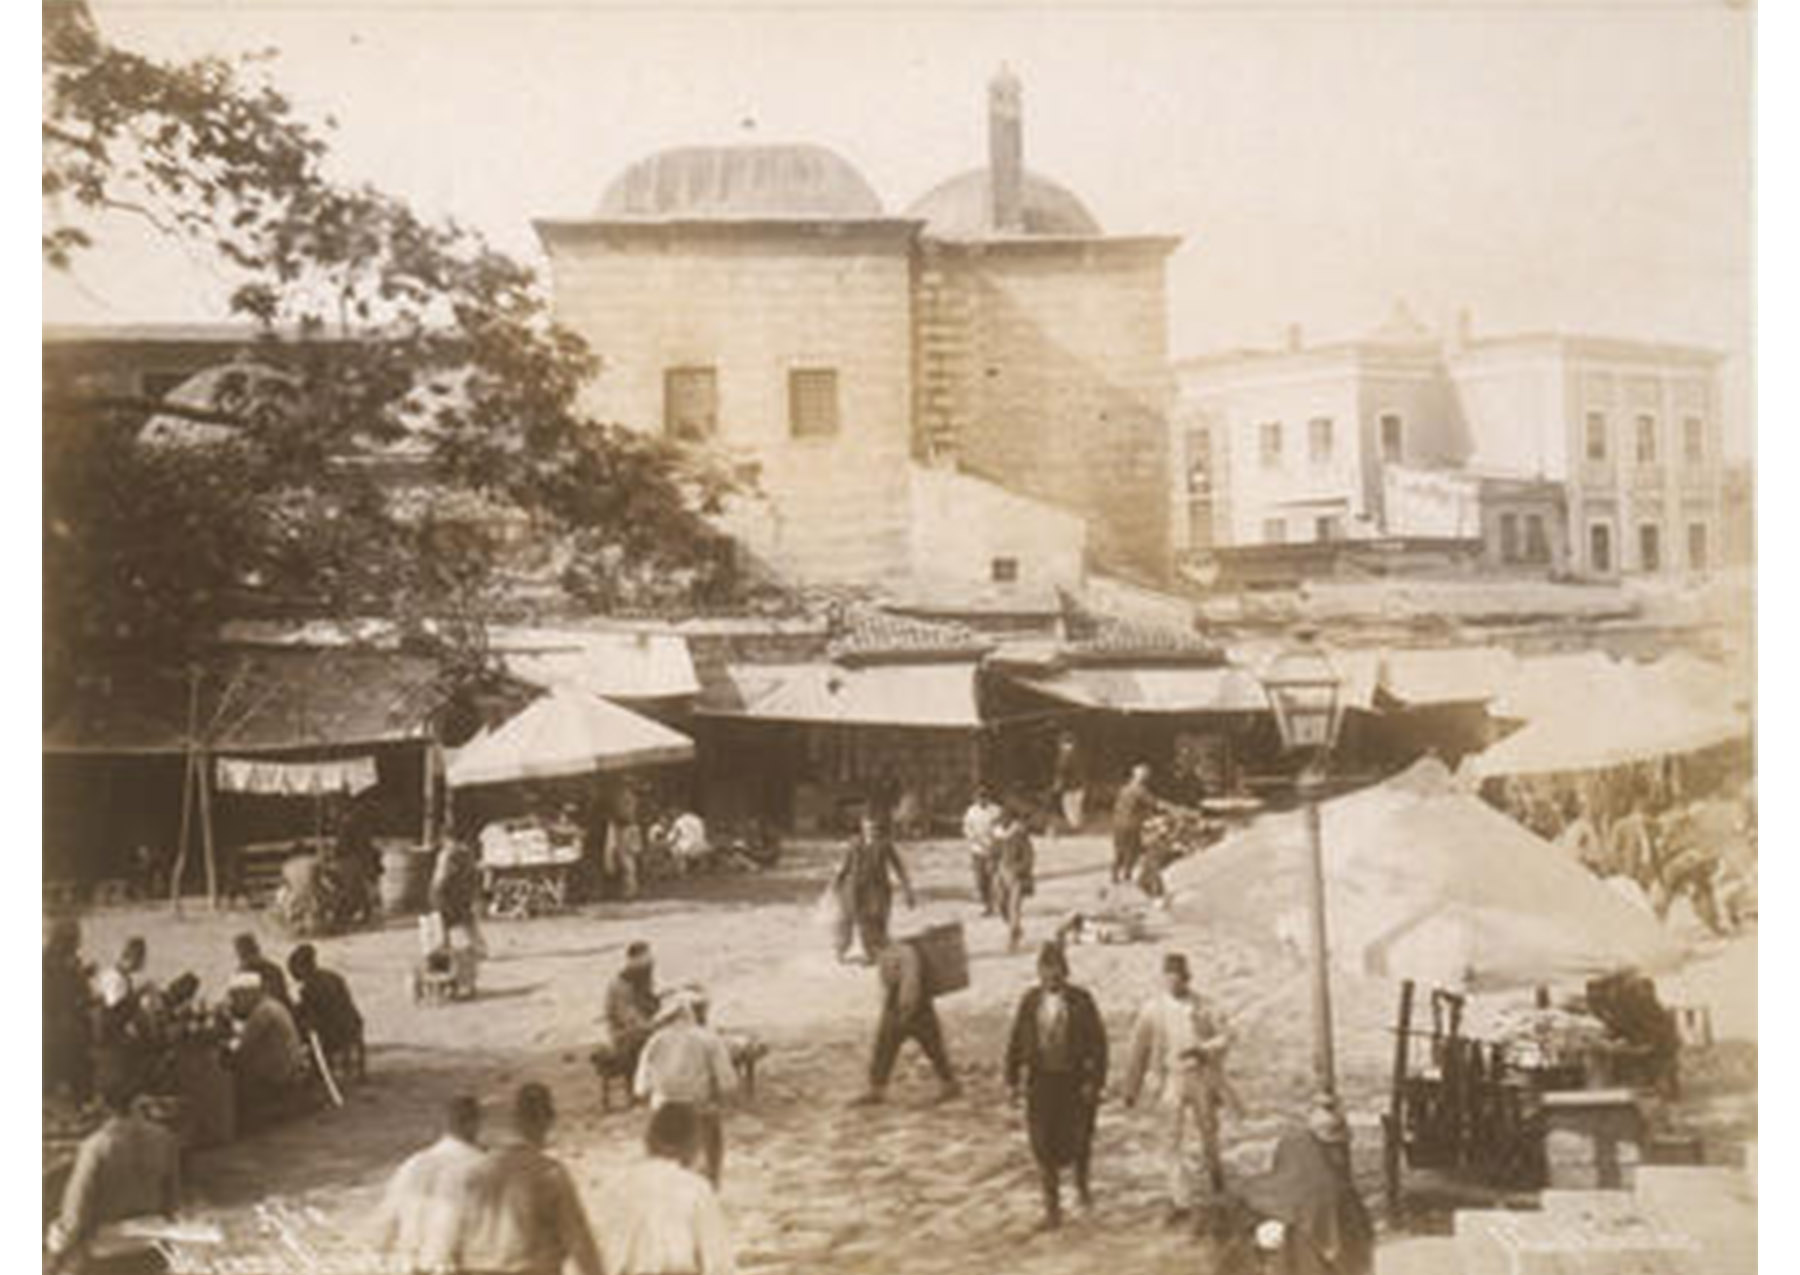 bazaar in the streets of Istanbul, with shops under tents and people walking around